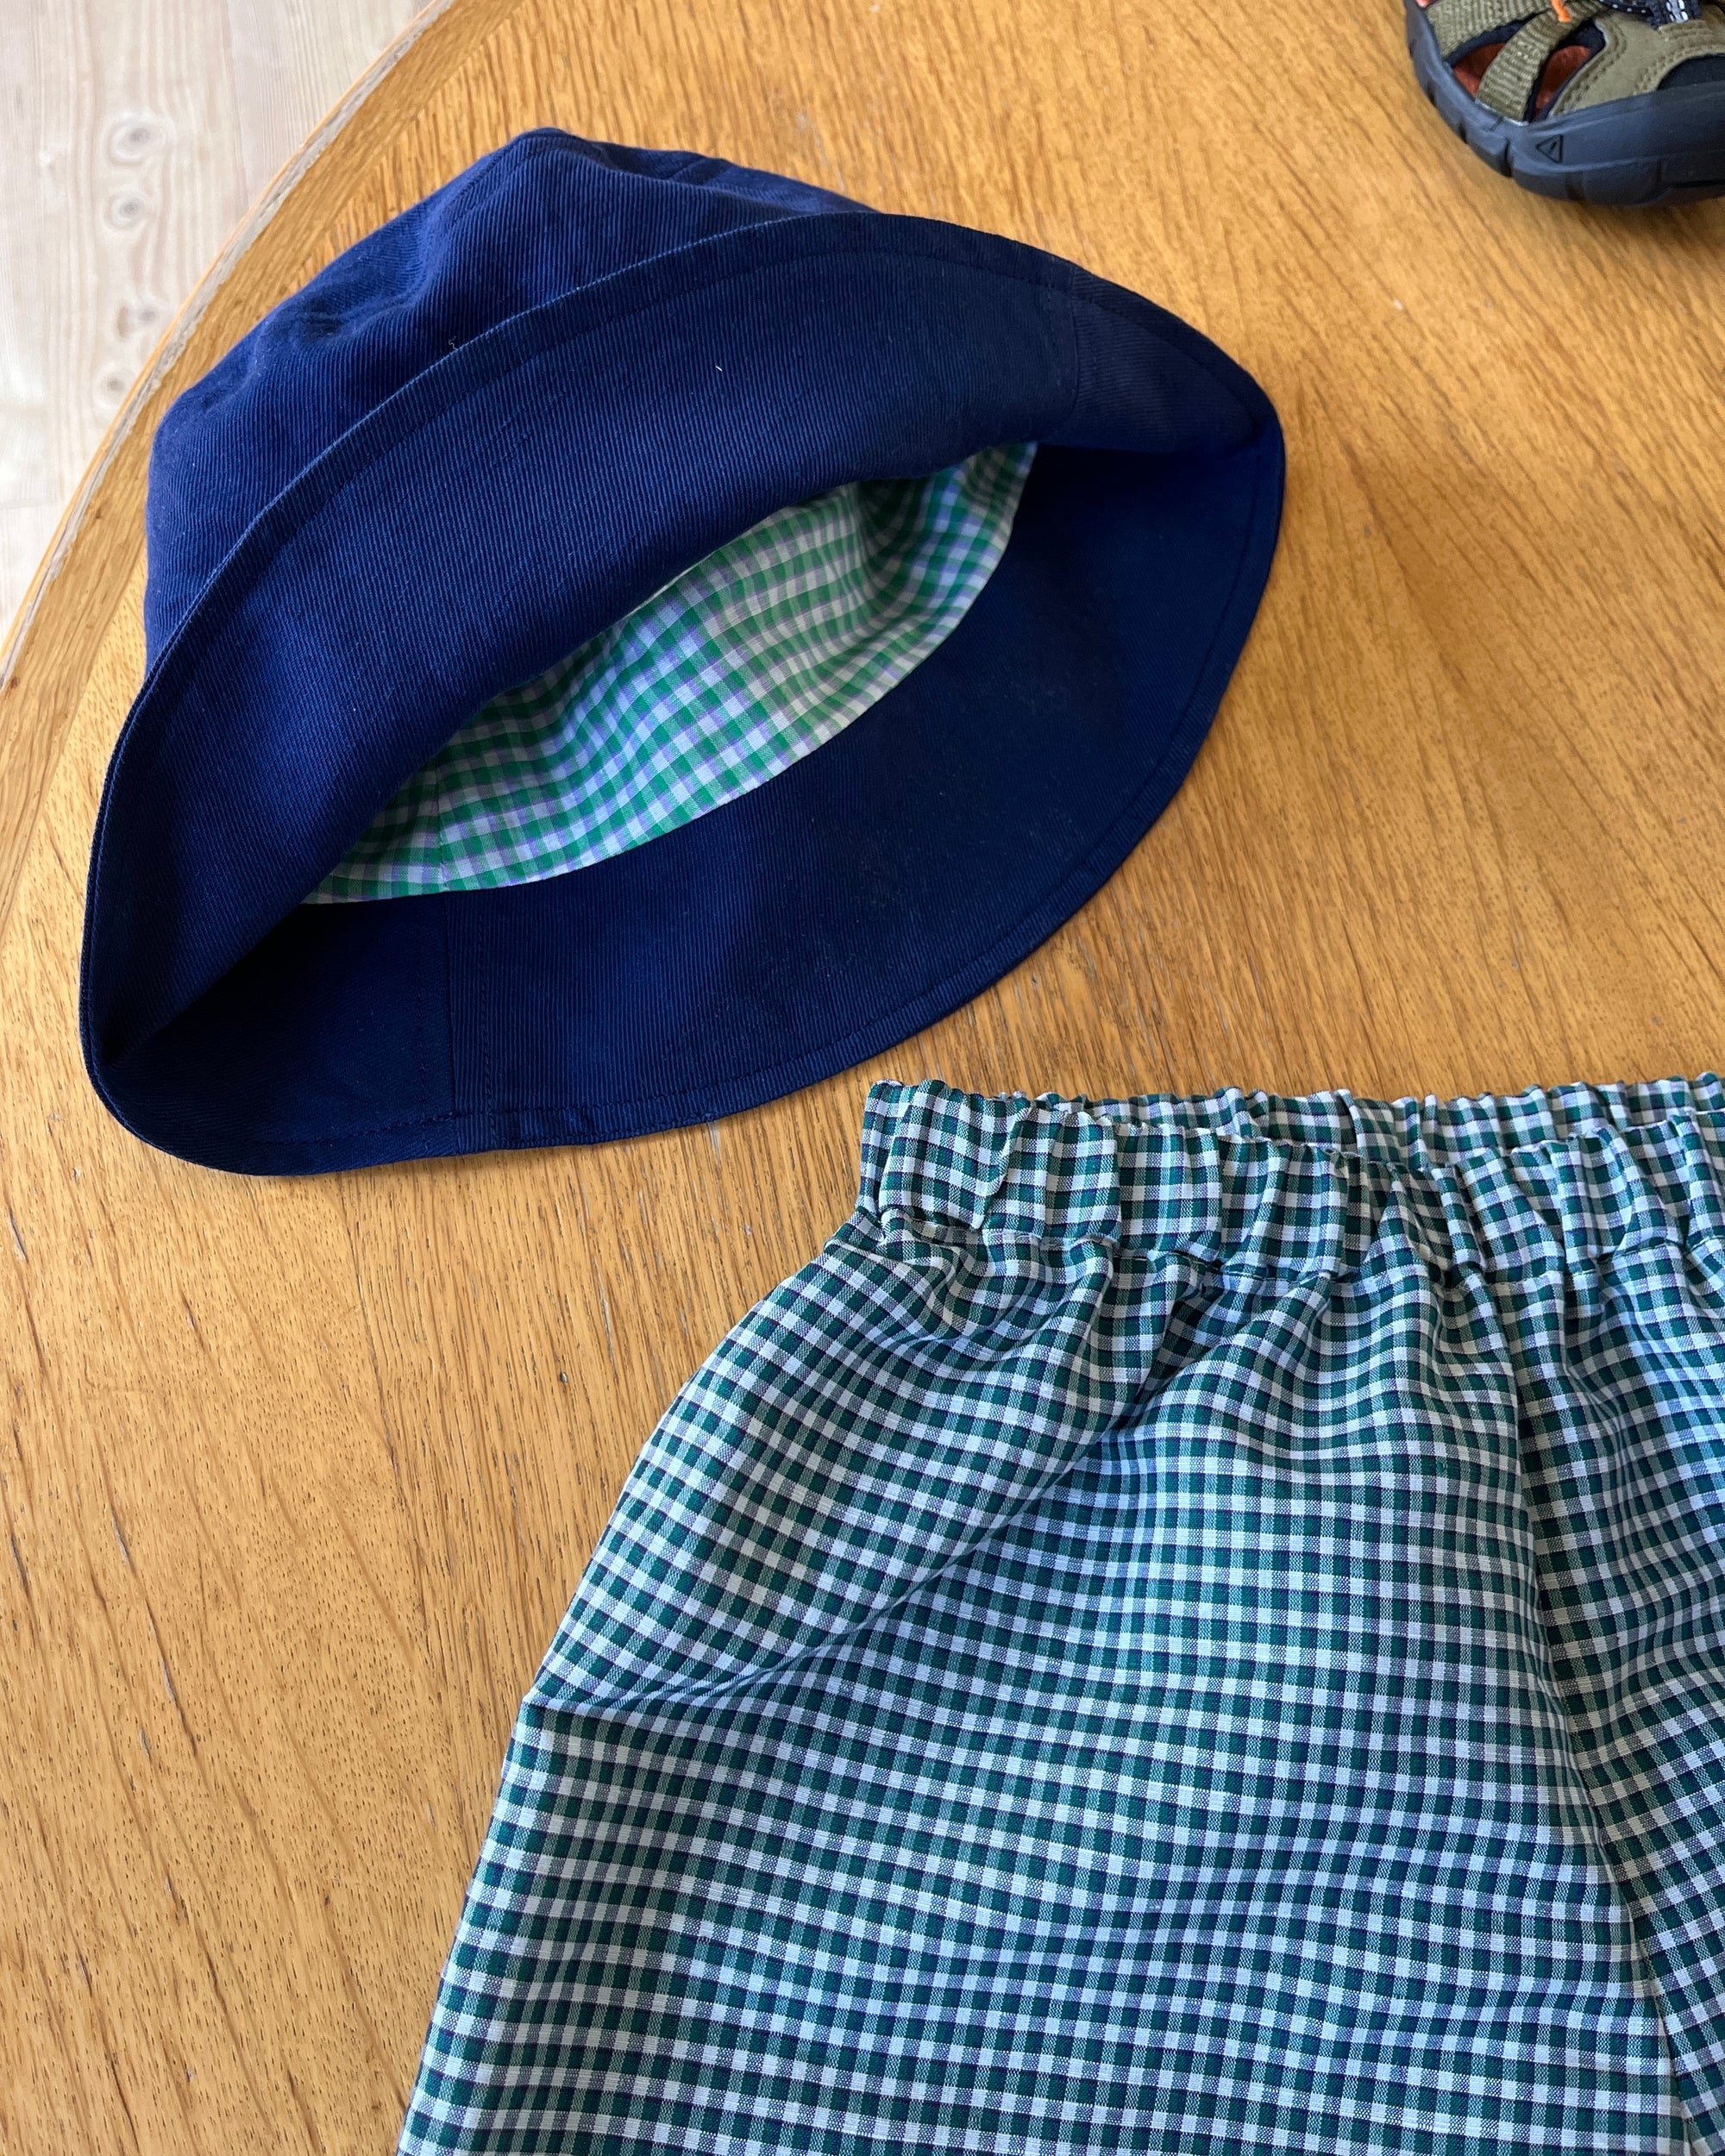 Sewing Project No. 04: Favorite Shorts Mini + Bucket Hat